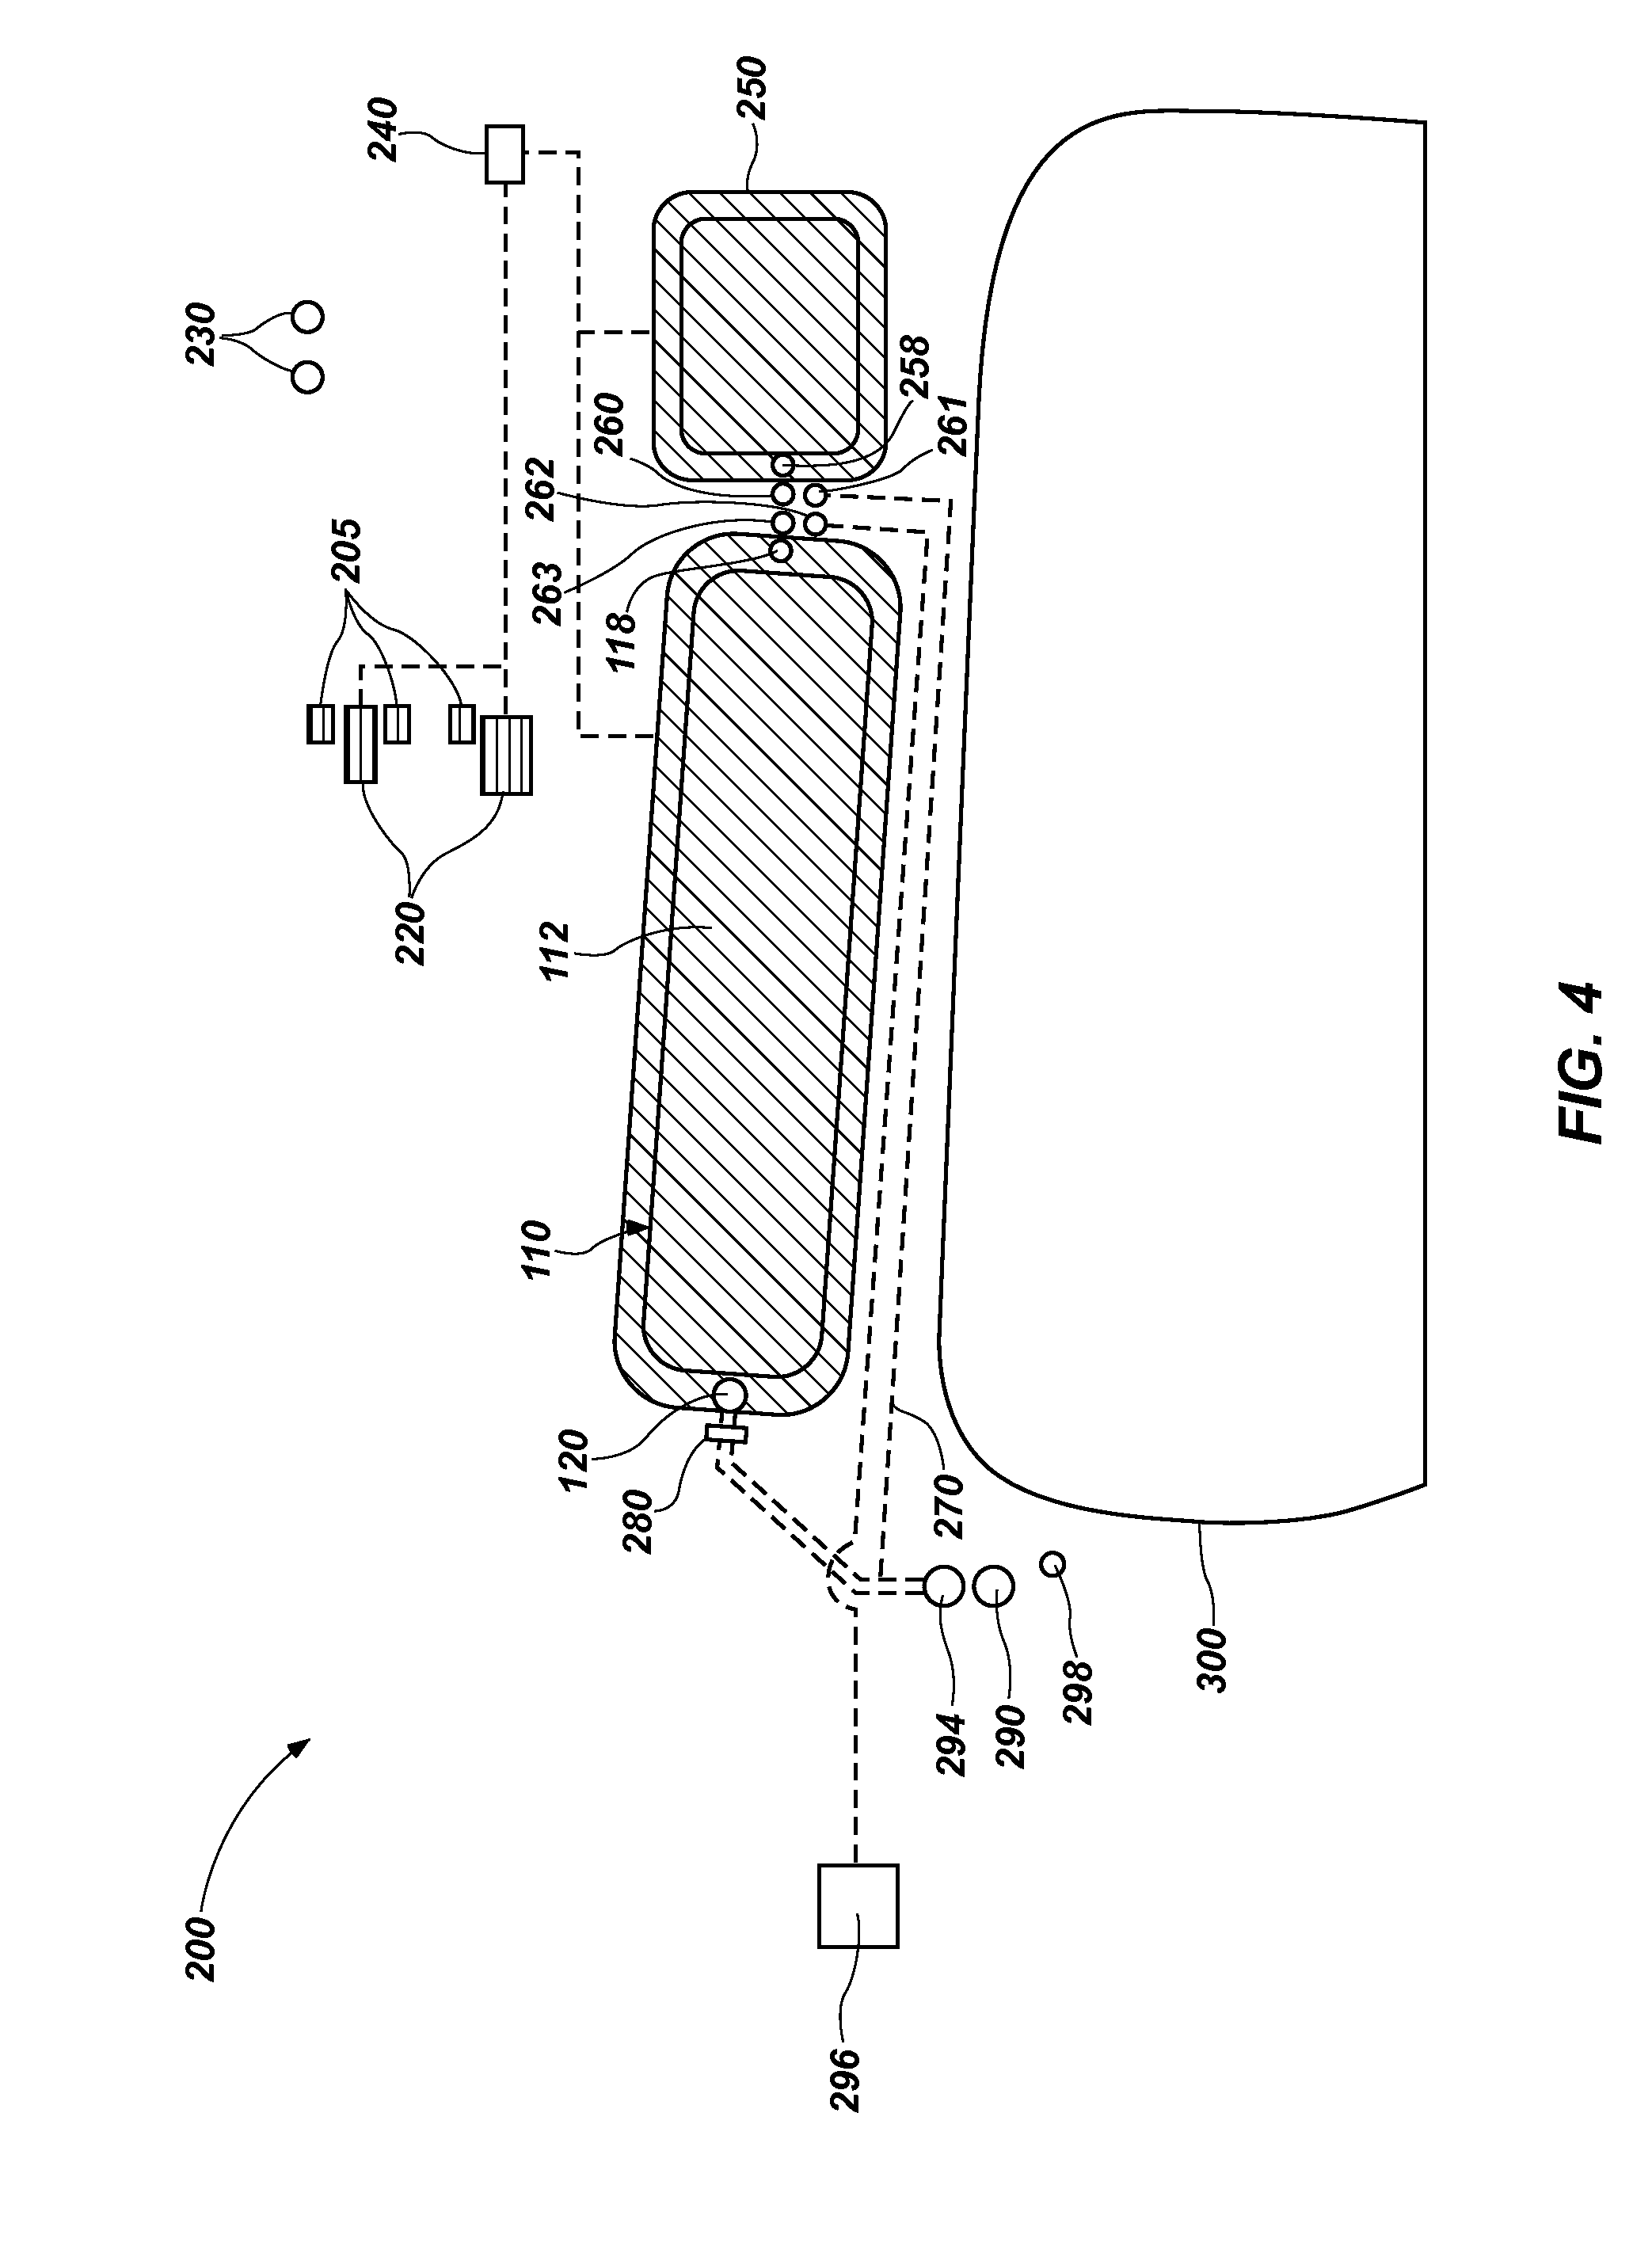 Methods for treating wastewater from exploration for and production of  oil and gas